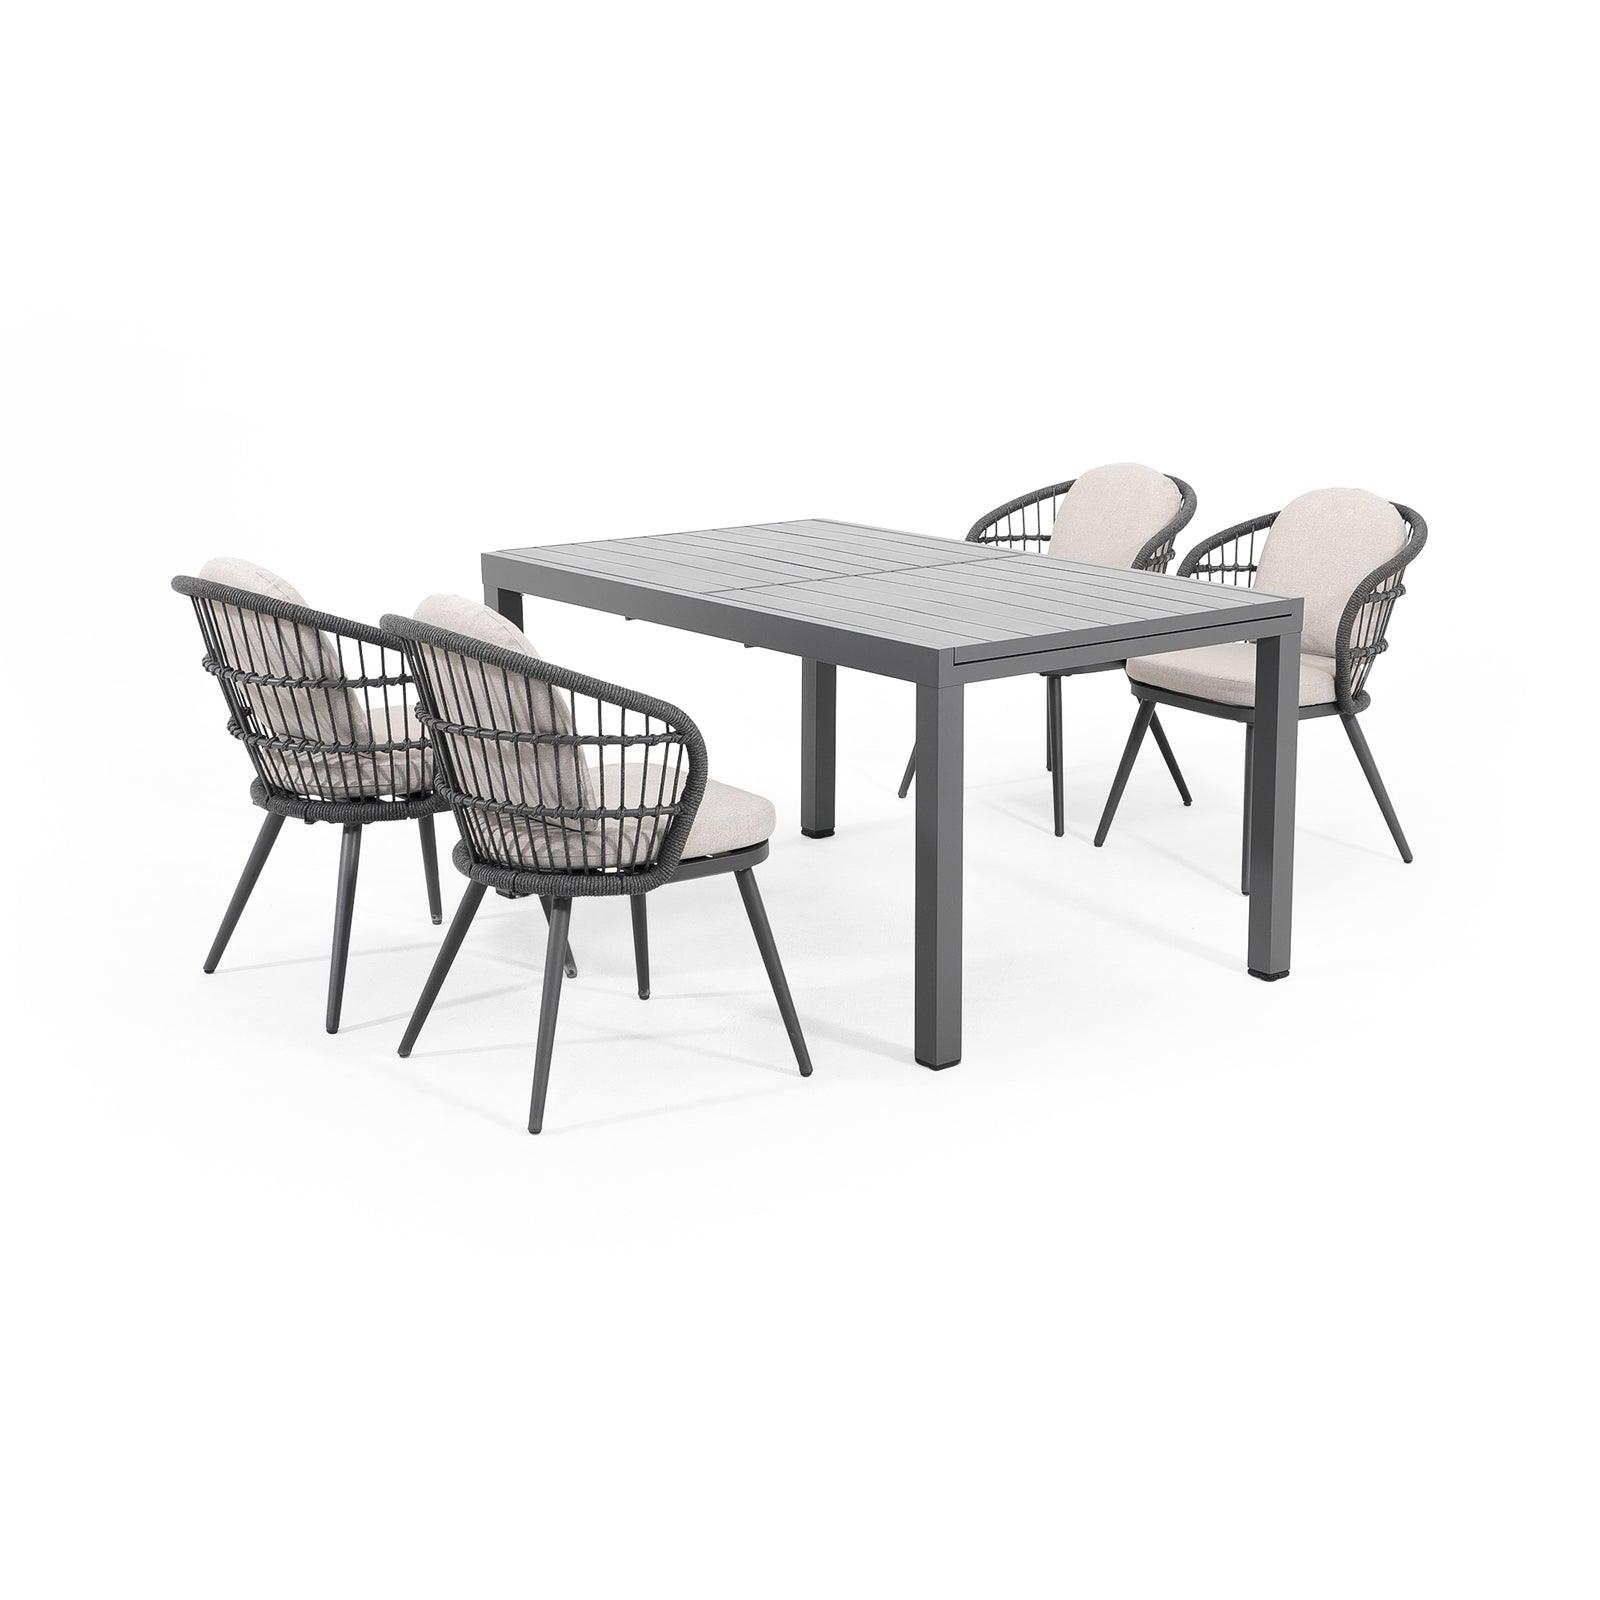 Comino dark grey aluminum outdoor Dining Set for 4 with light grey cushions, 4 dining seats with backrest rope design, 1 extendable rectangle aluminum dining table - Jardina Furniture